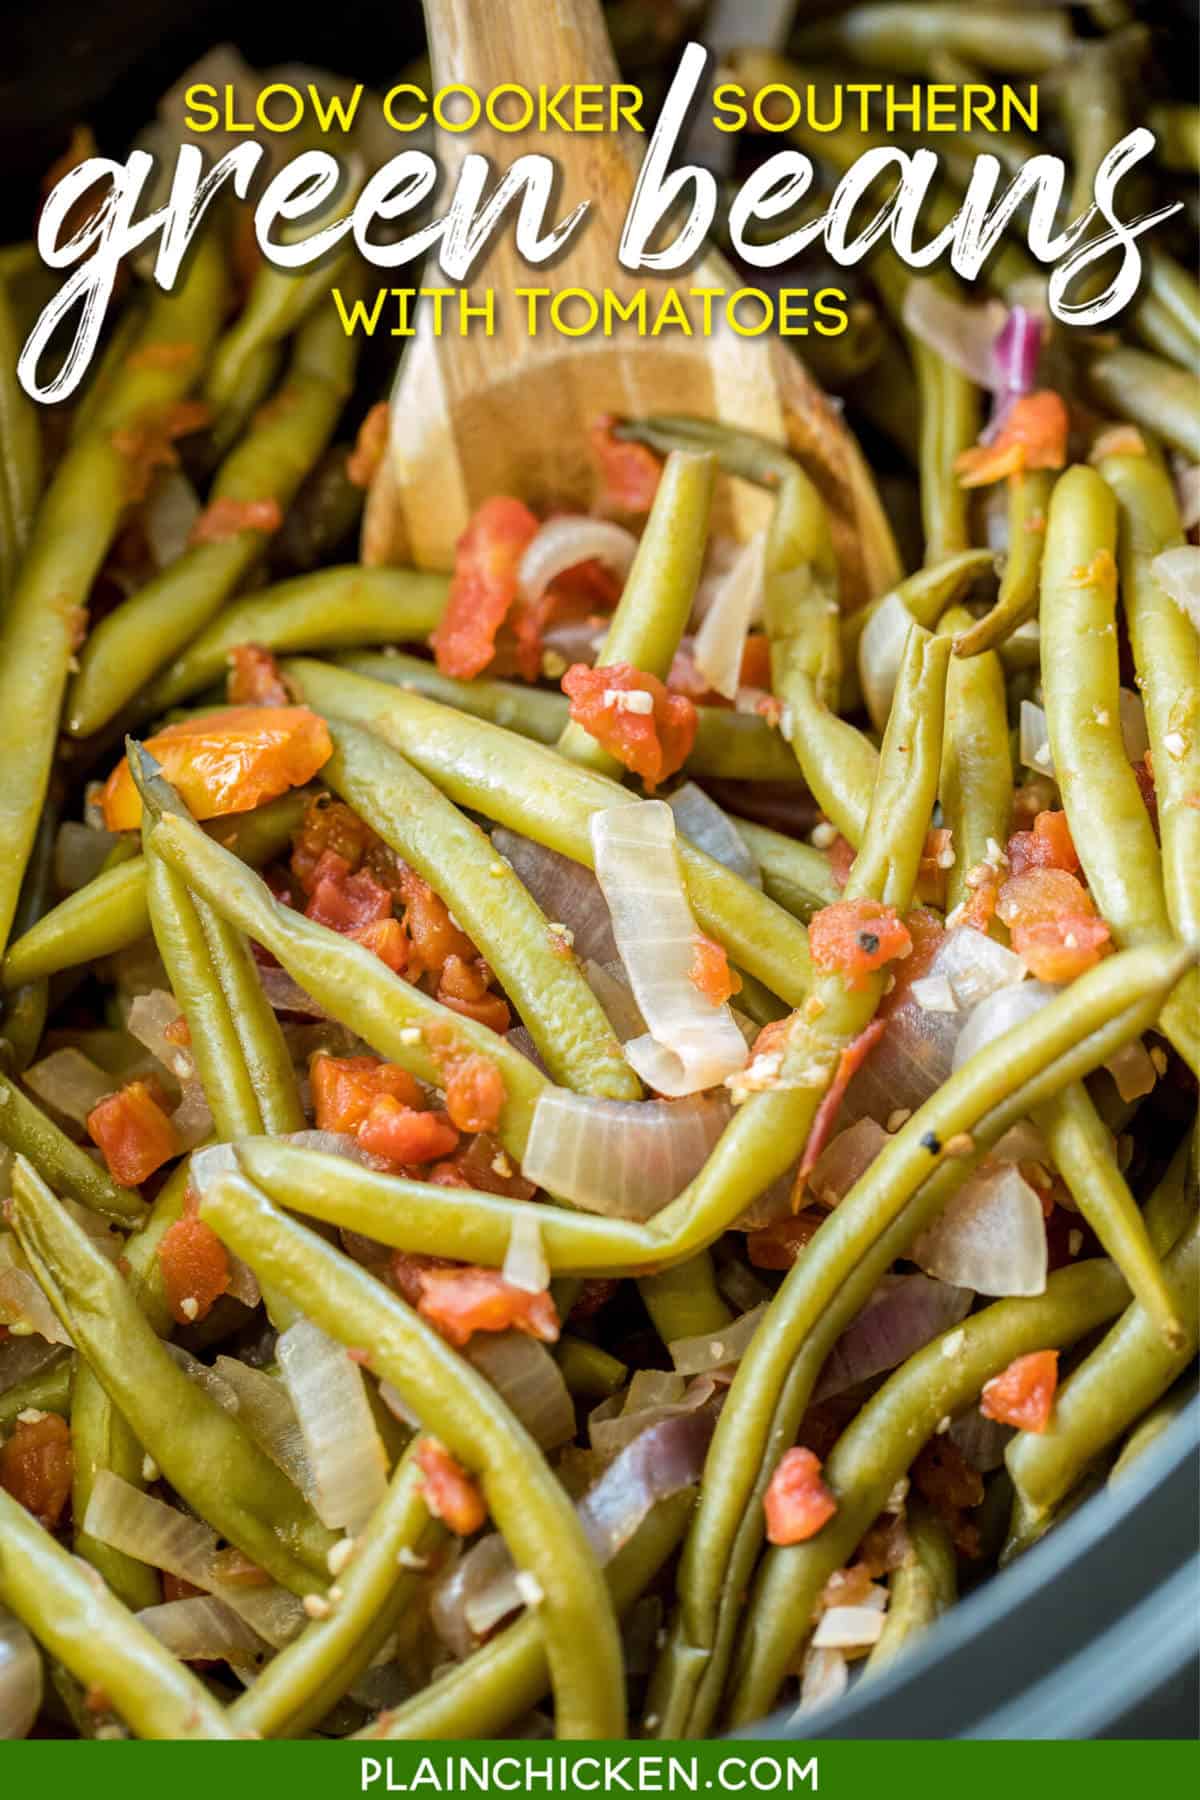 Slow Cooker Southern Green Beans with Tomatoes - Plain Chicken